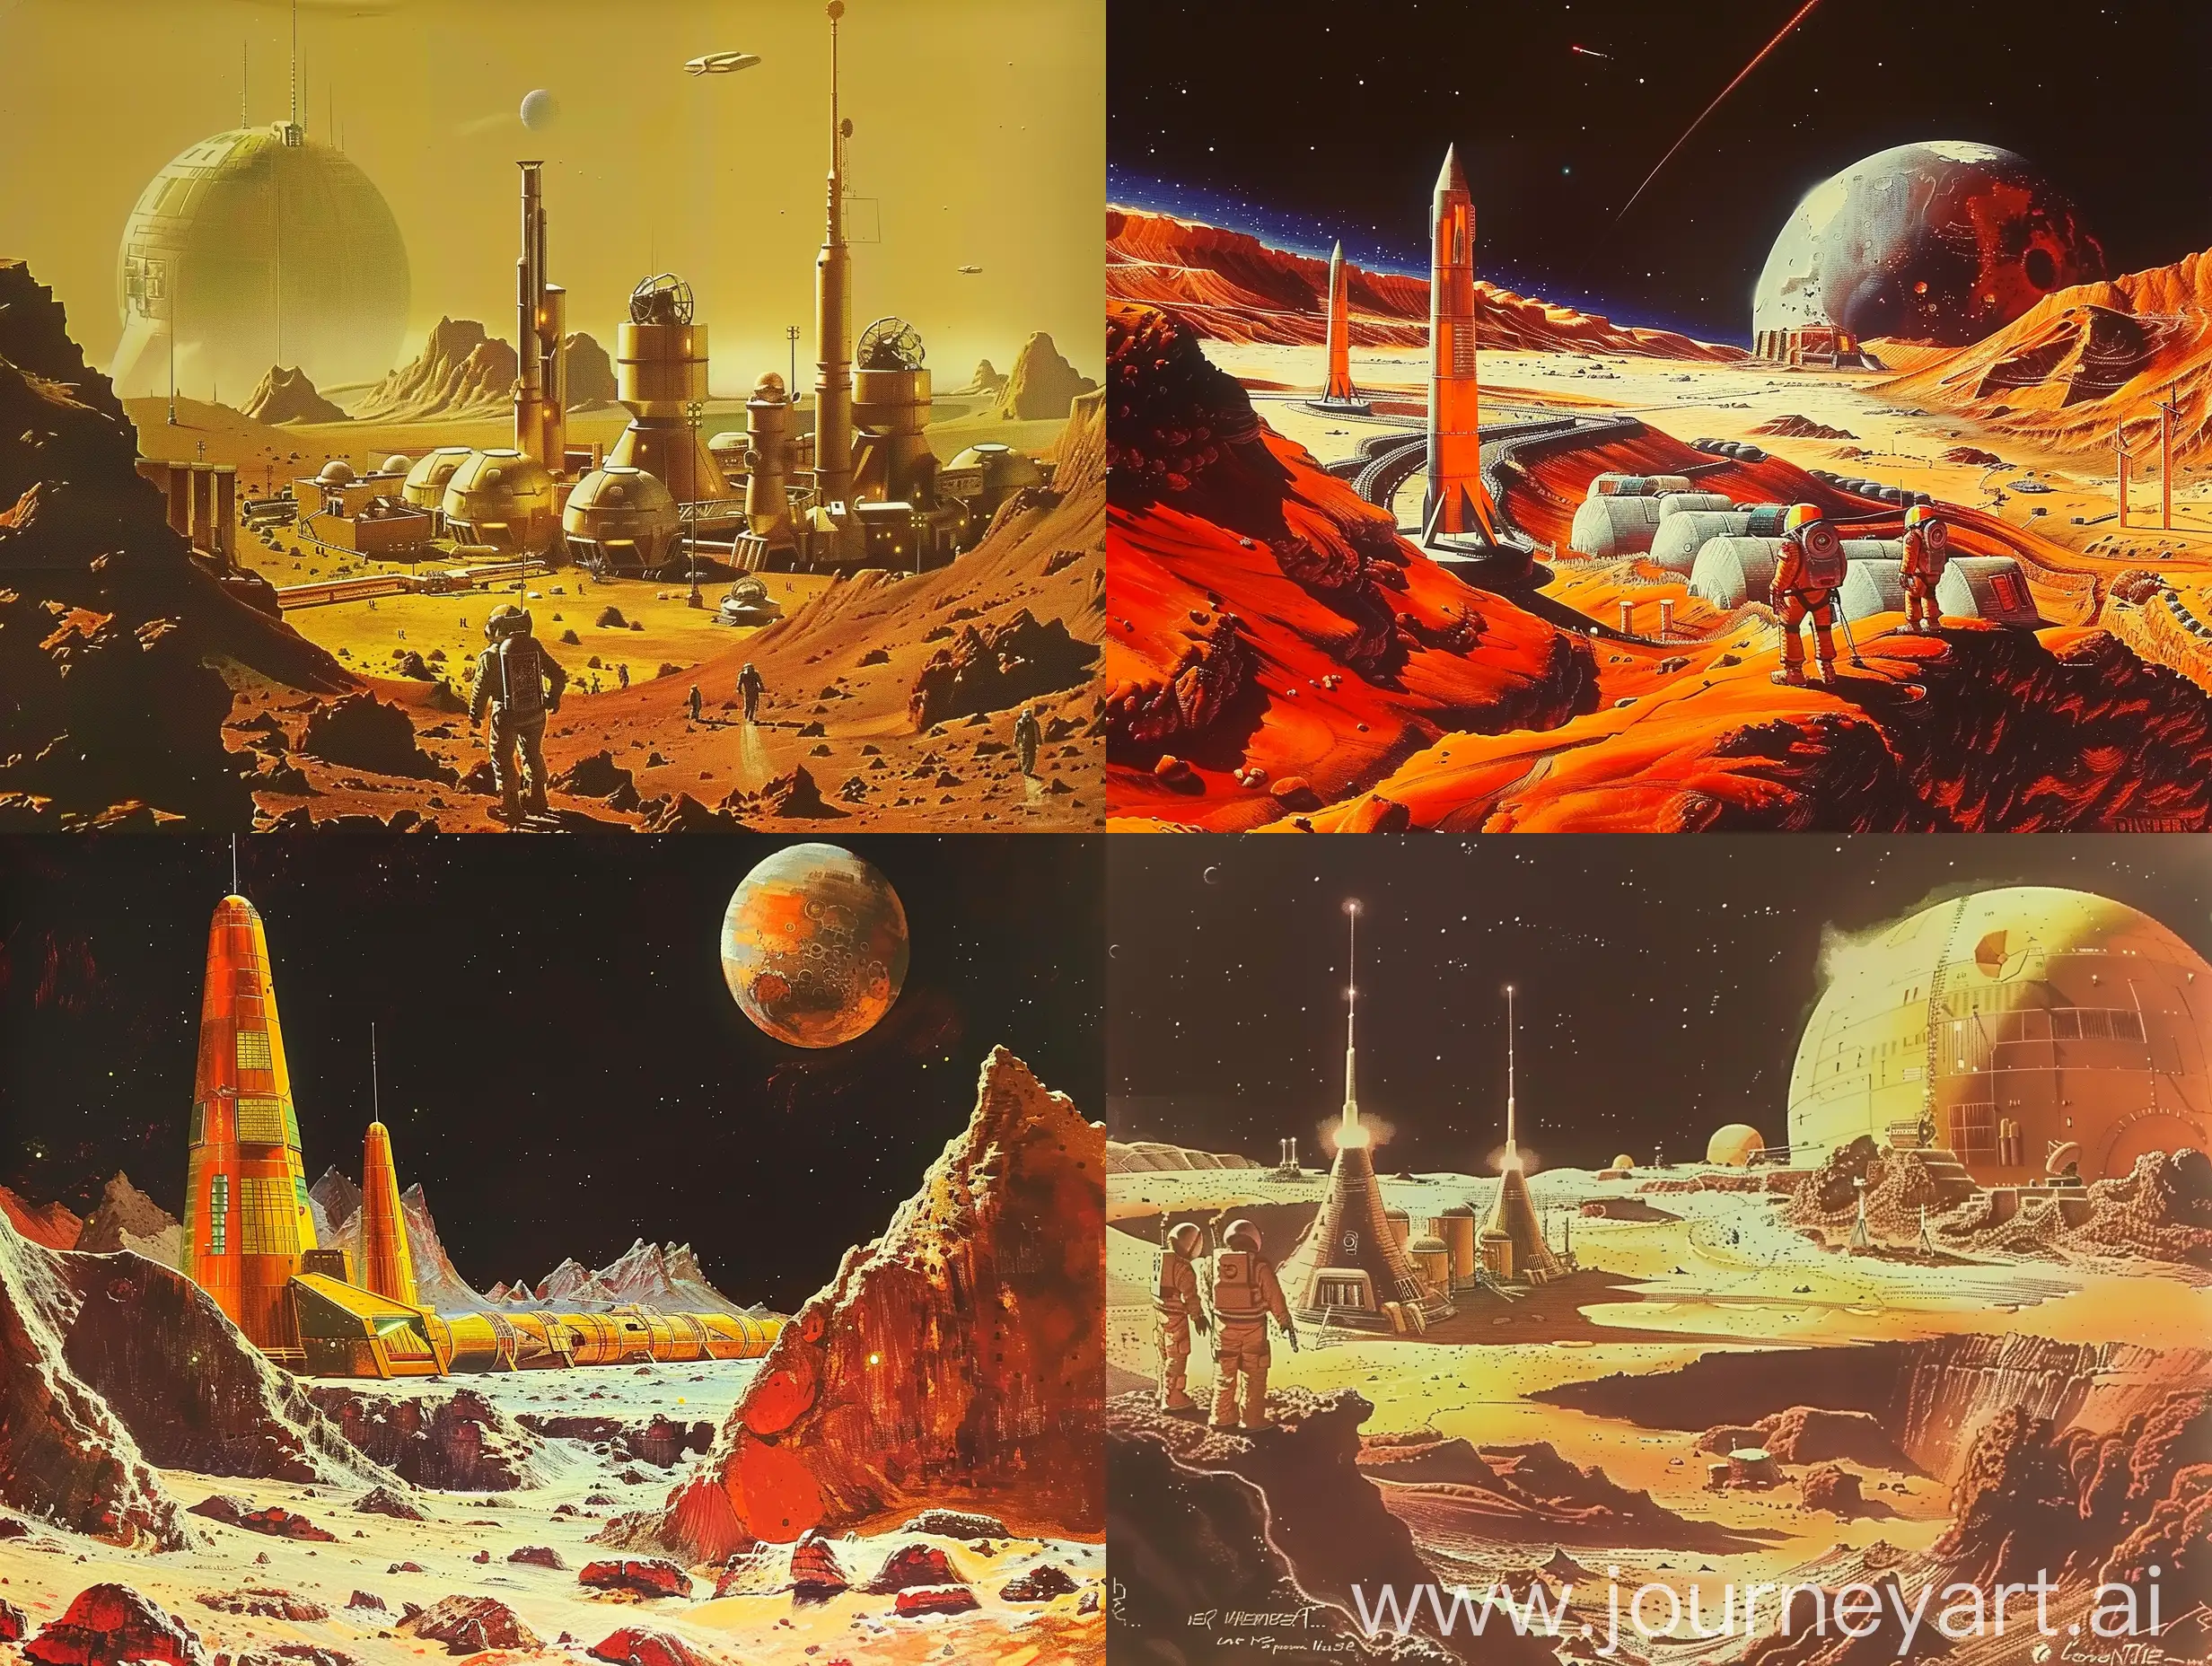 First-Human-Terraforming-Settlement-on-Mars-in-Retro-70s-SciFi-Style